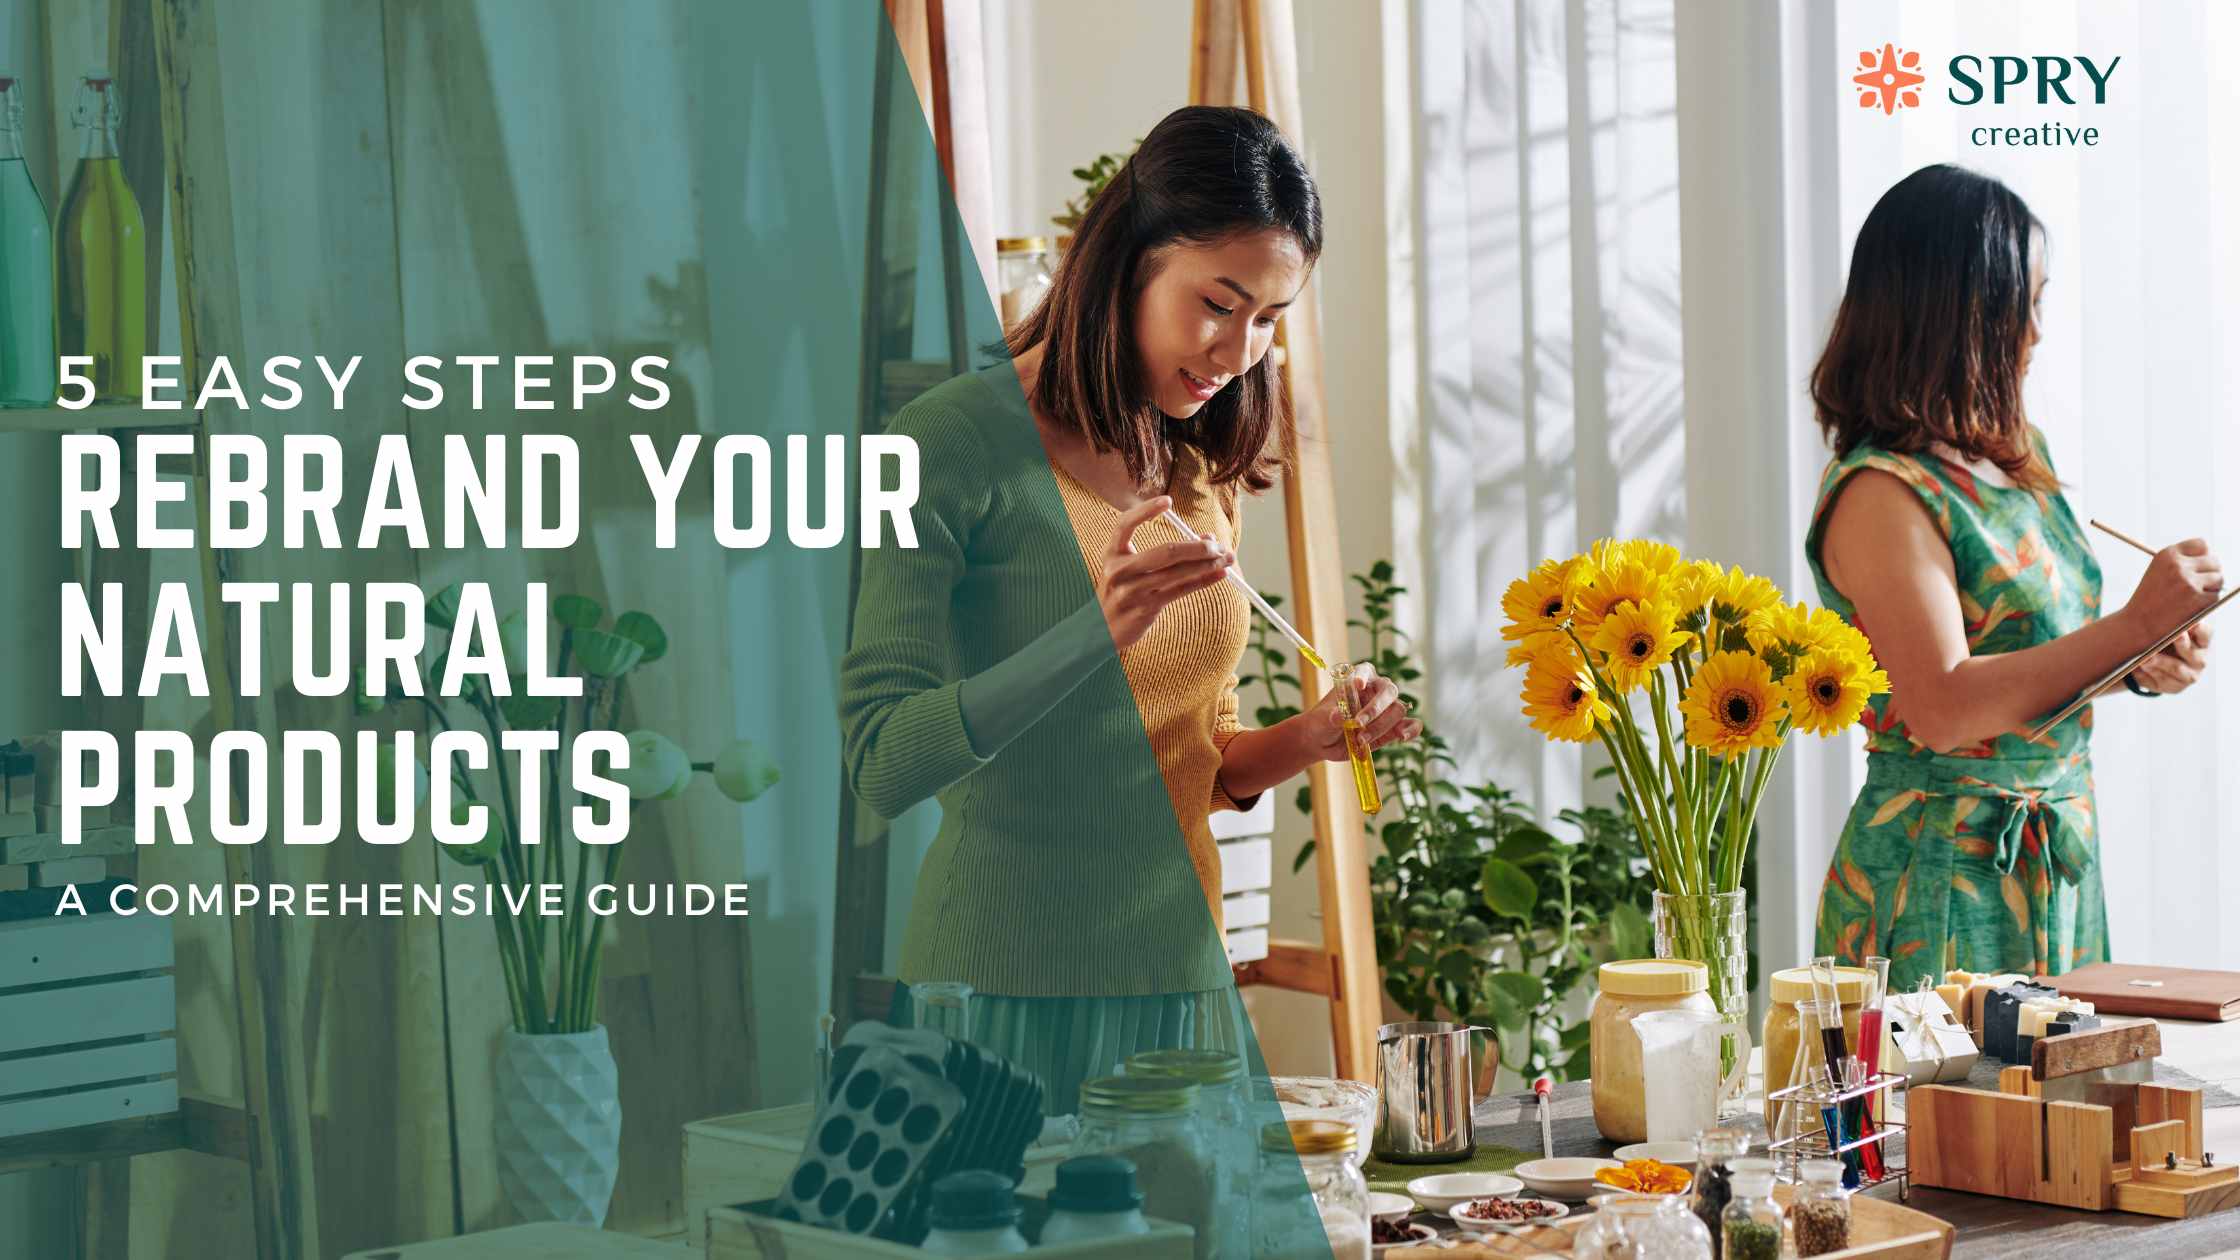 5 Easy Steps to Rebrand Your Natural Products: A Comprehensive Guide